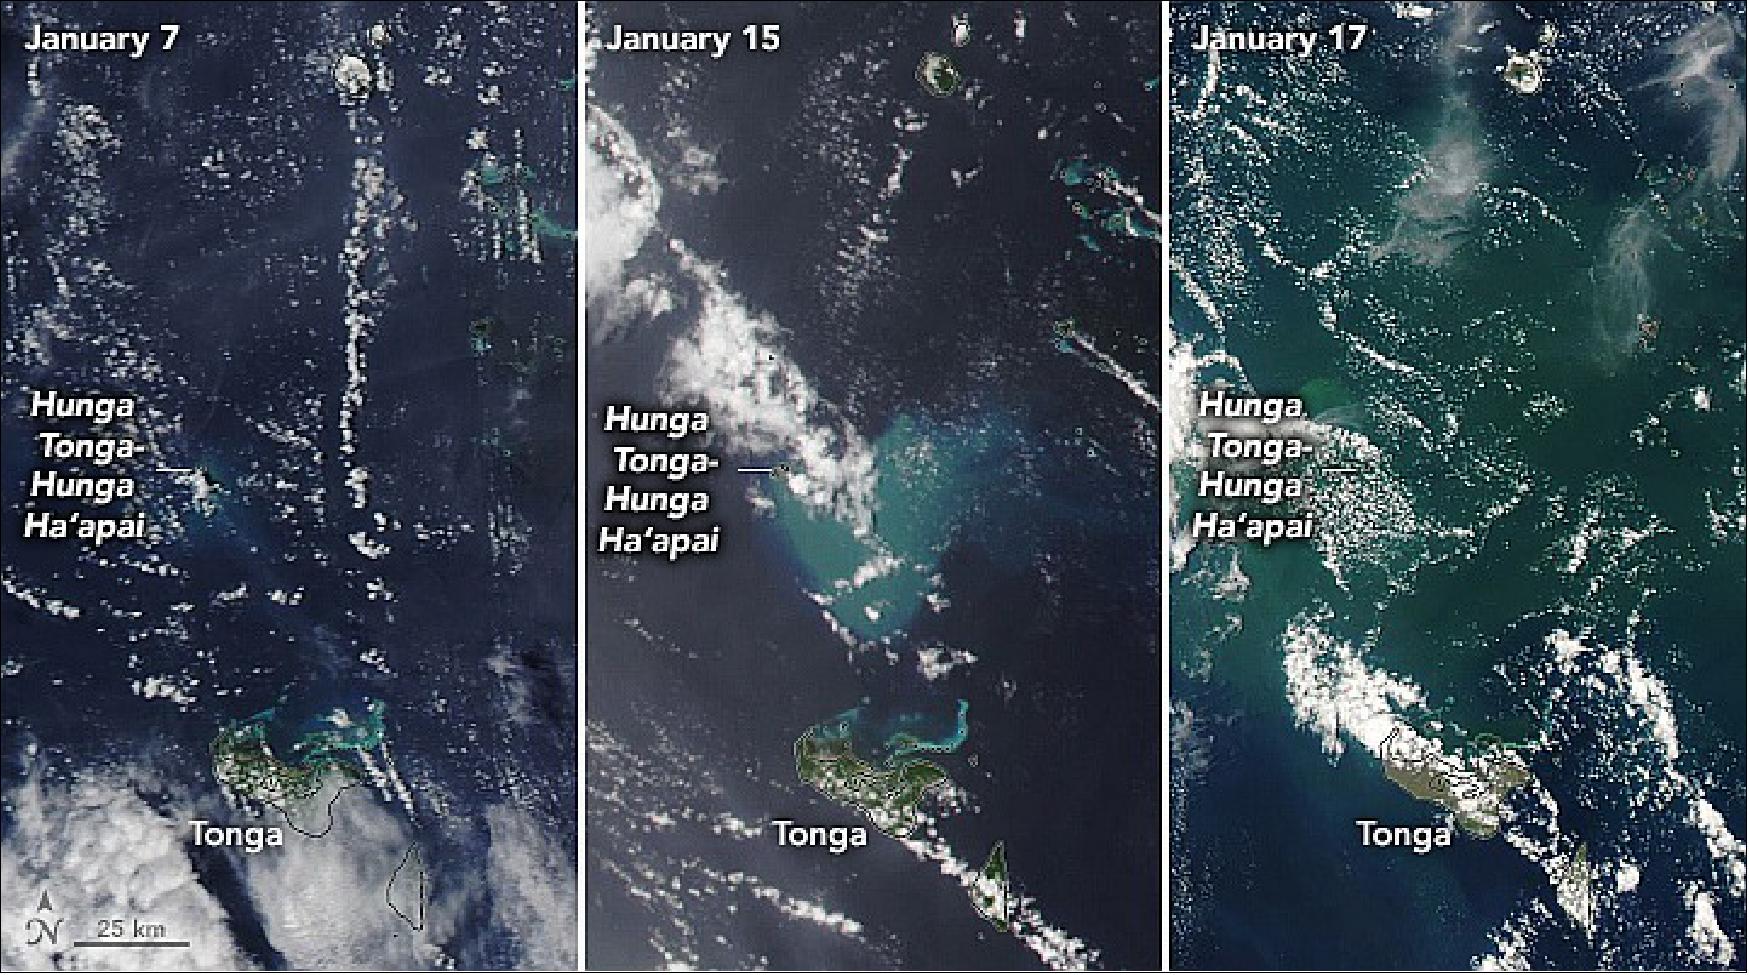 Figure 27: The trio of natural-color images shows ash, pumice, and sediment discoloring the water around the eruption site. The images were acquired by the Moderate Resolution Imaging Spectroradiometer (MODIS) on NASA’s Aqua satellite (image credit: NASA Earth Observatory).